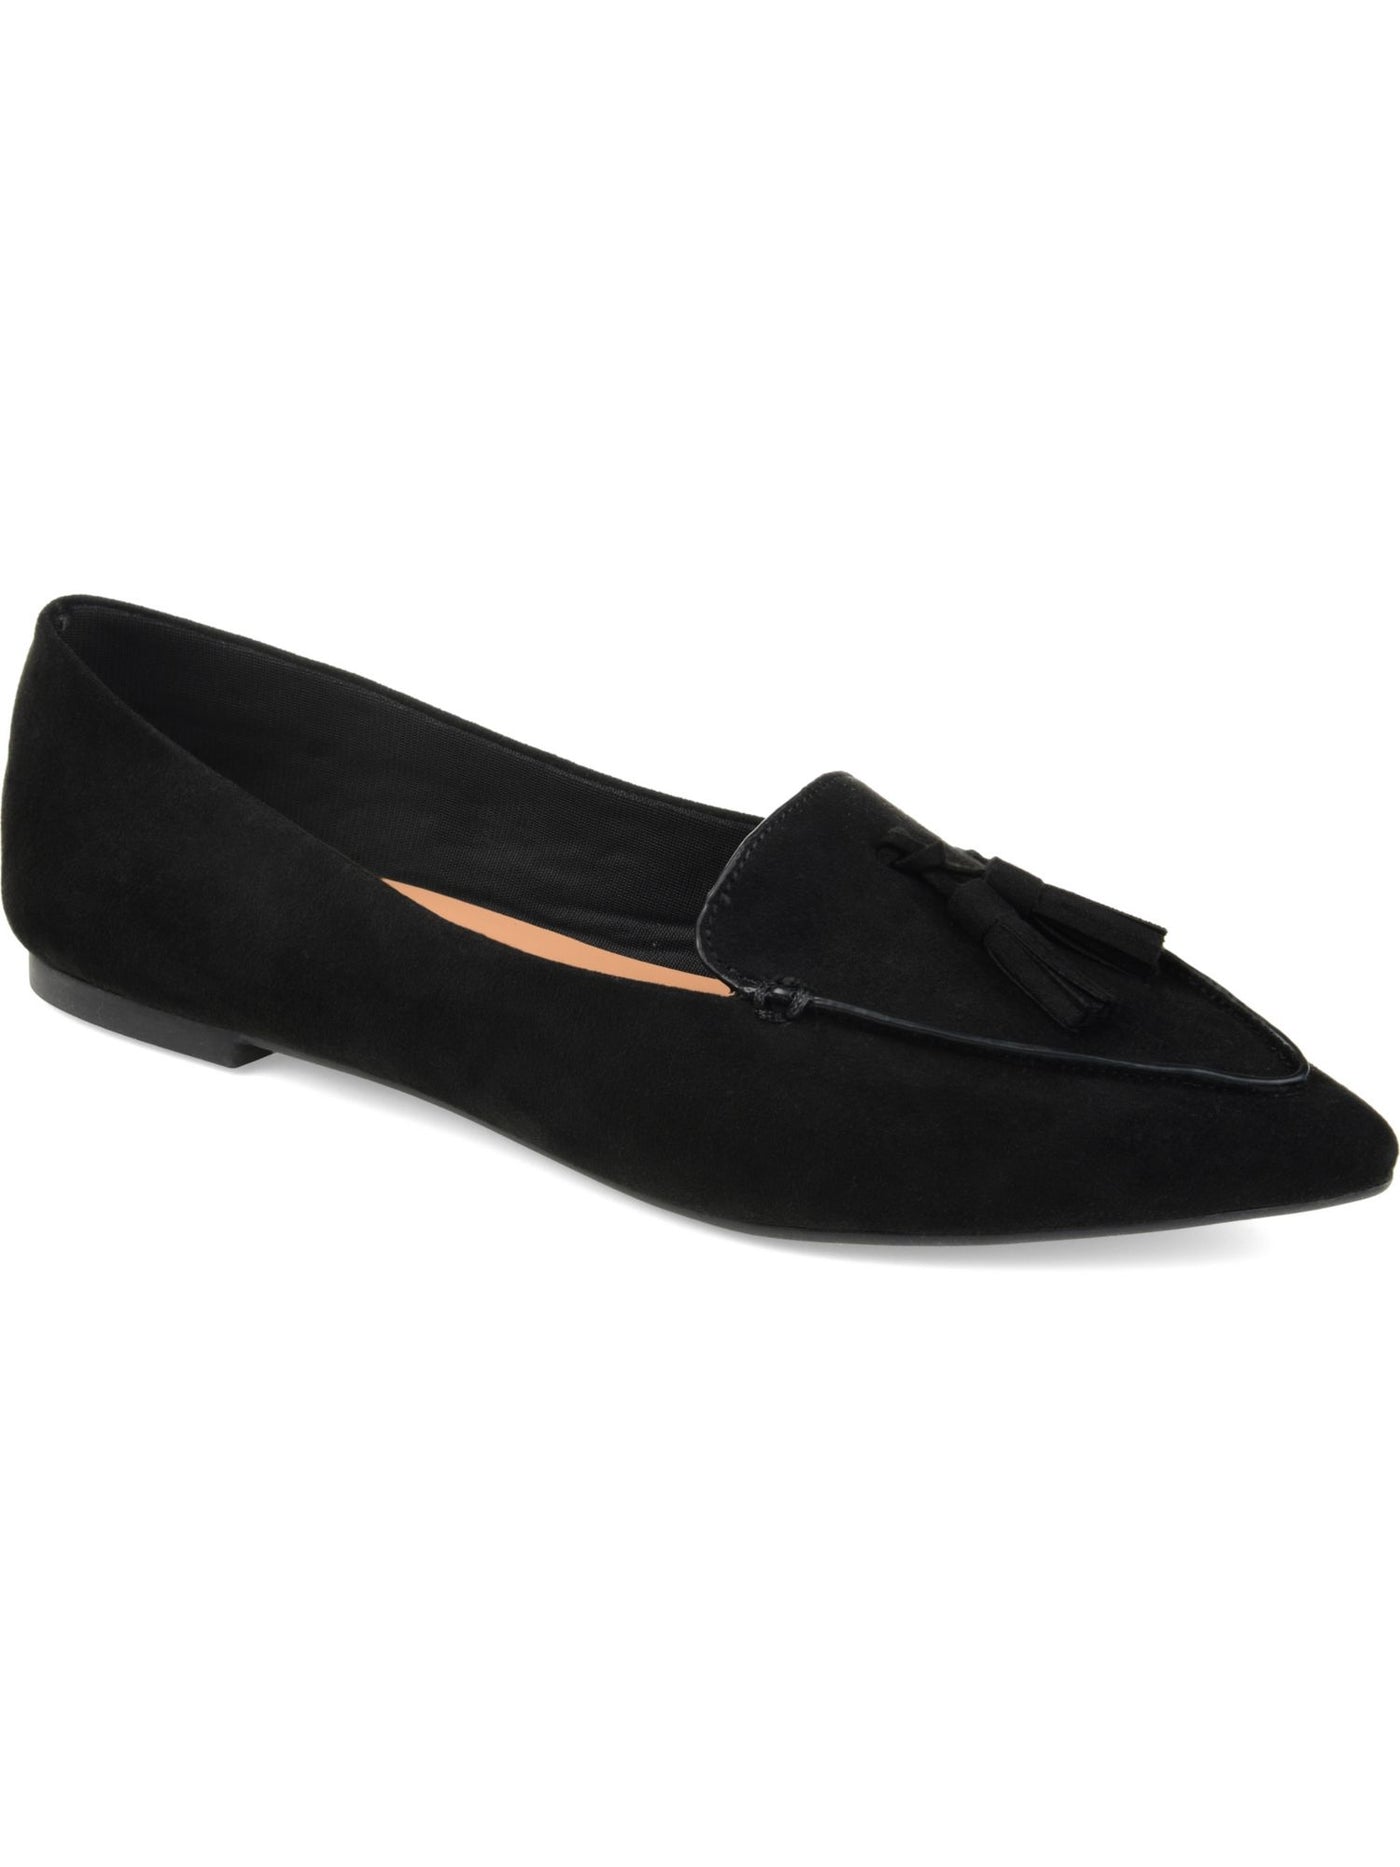 JOURNEE COLLECTION Womens Black Cushioned Lindsey Pointed Toe Slip On Loafers Shoes 11